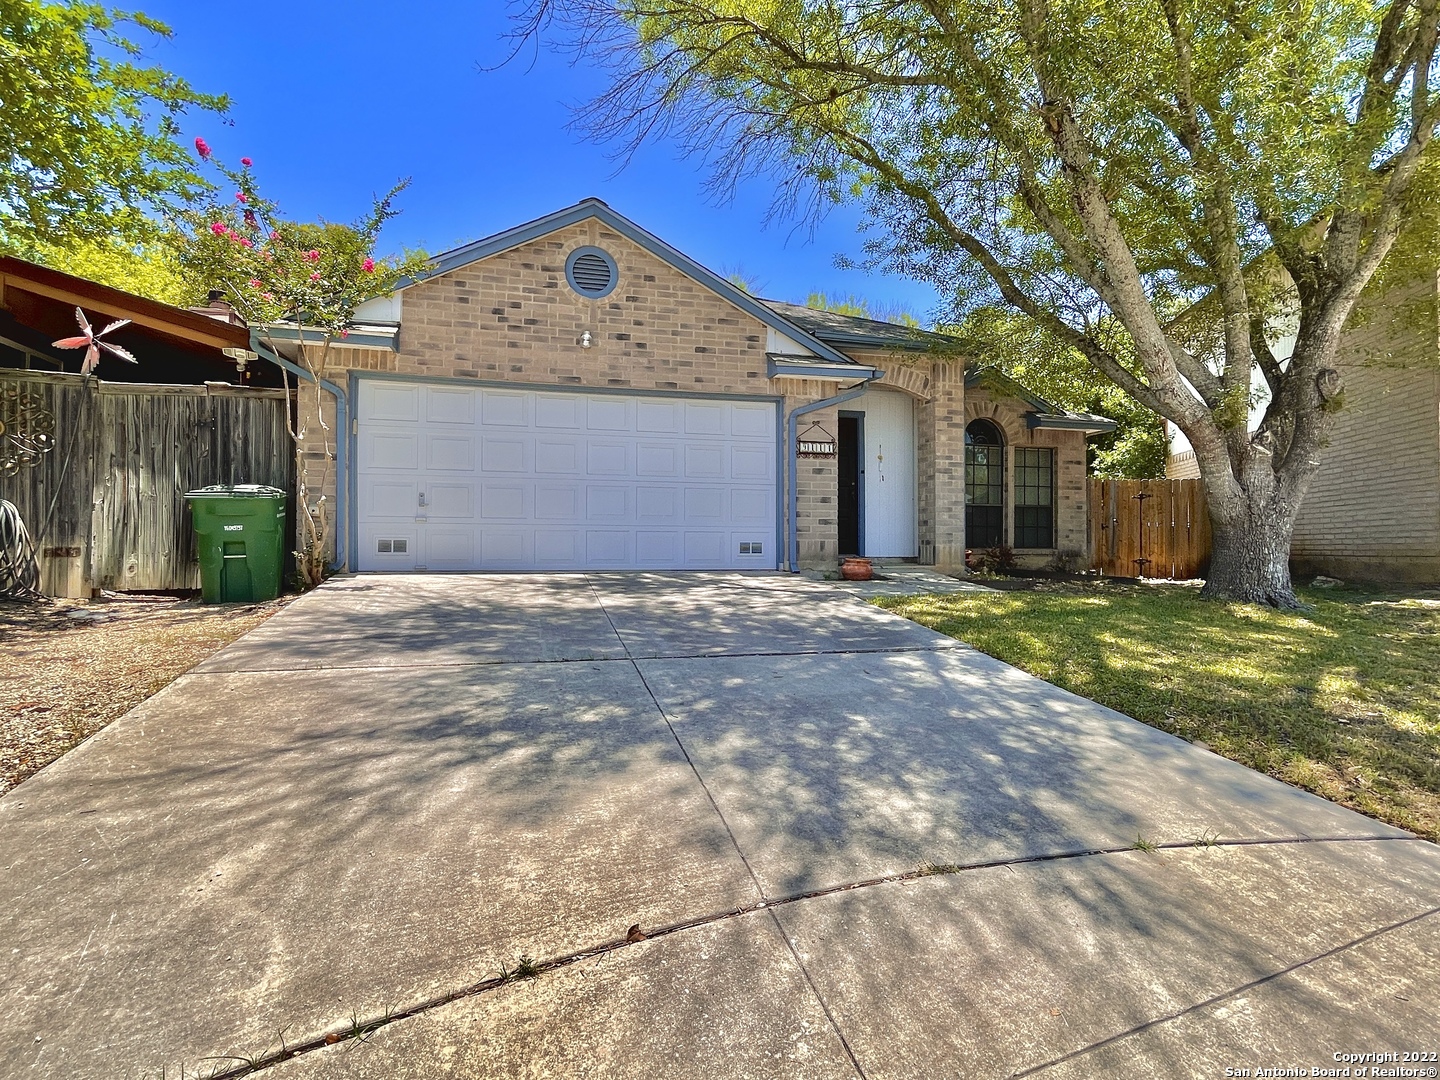 Well maintained 1 story home in highly sought, established neighborhood in NW San Antonio! Home features vaulted ceilings, open floorplan, fireplace, 2 eating areas, plus more! Wood-like laminate flooring and ceramic tile in all "high traffic" areas. Covered patio is ideal for entertaining in this Texas heat! Prime location, minutes from Medical Center, UTSA, USAA, La Cantera, Six Flags Fiesta Texas, easy access to major roads/highways, shopping, dining, entertainment, and a short drive to downtown.  Make this cozy house YOUR HOME TODAY!